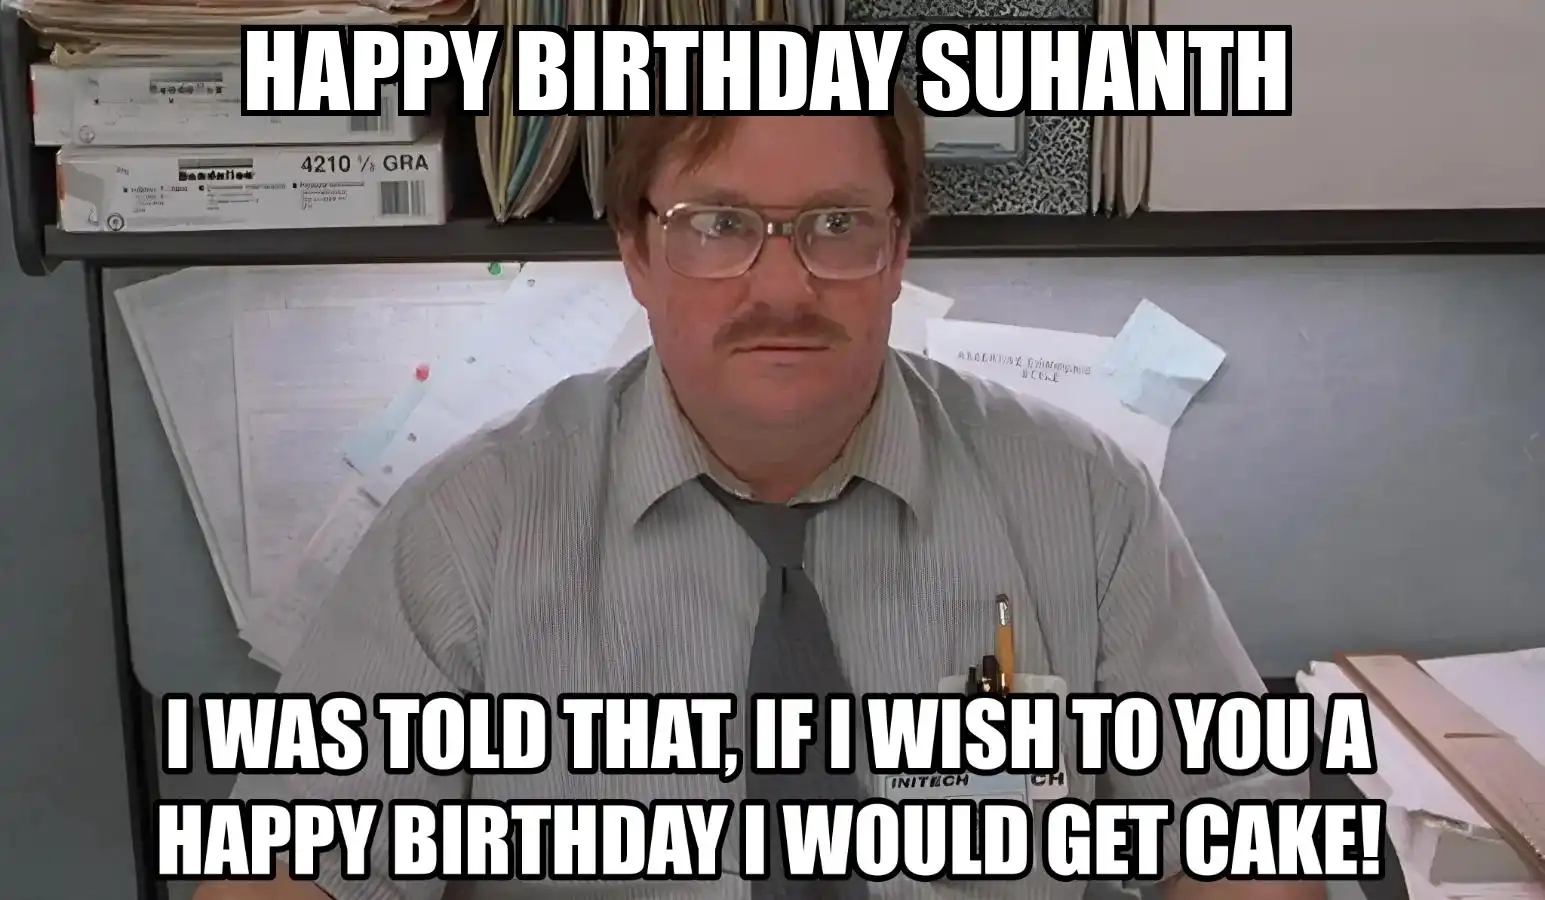 Happy Birthday Suhanth I Would Get A Cake Meme